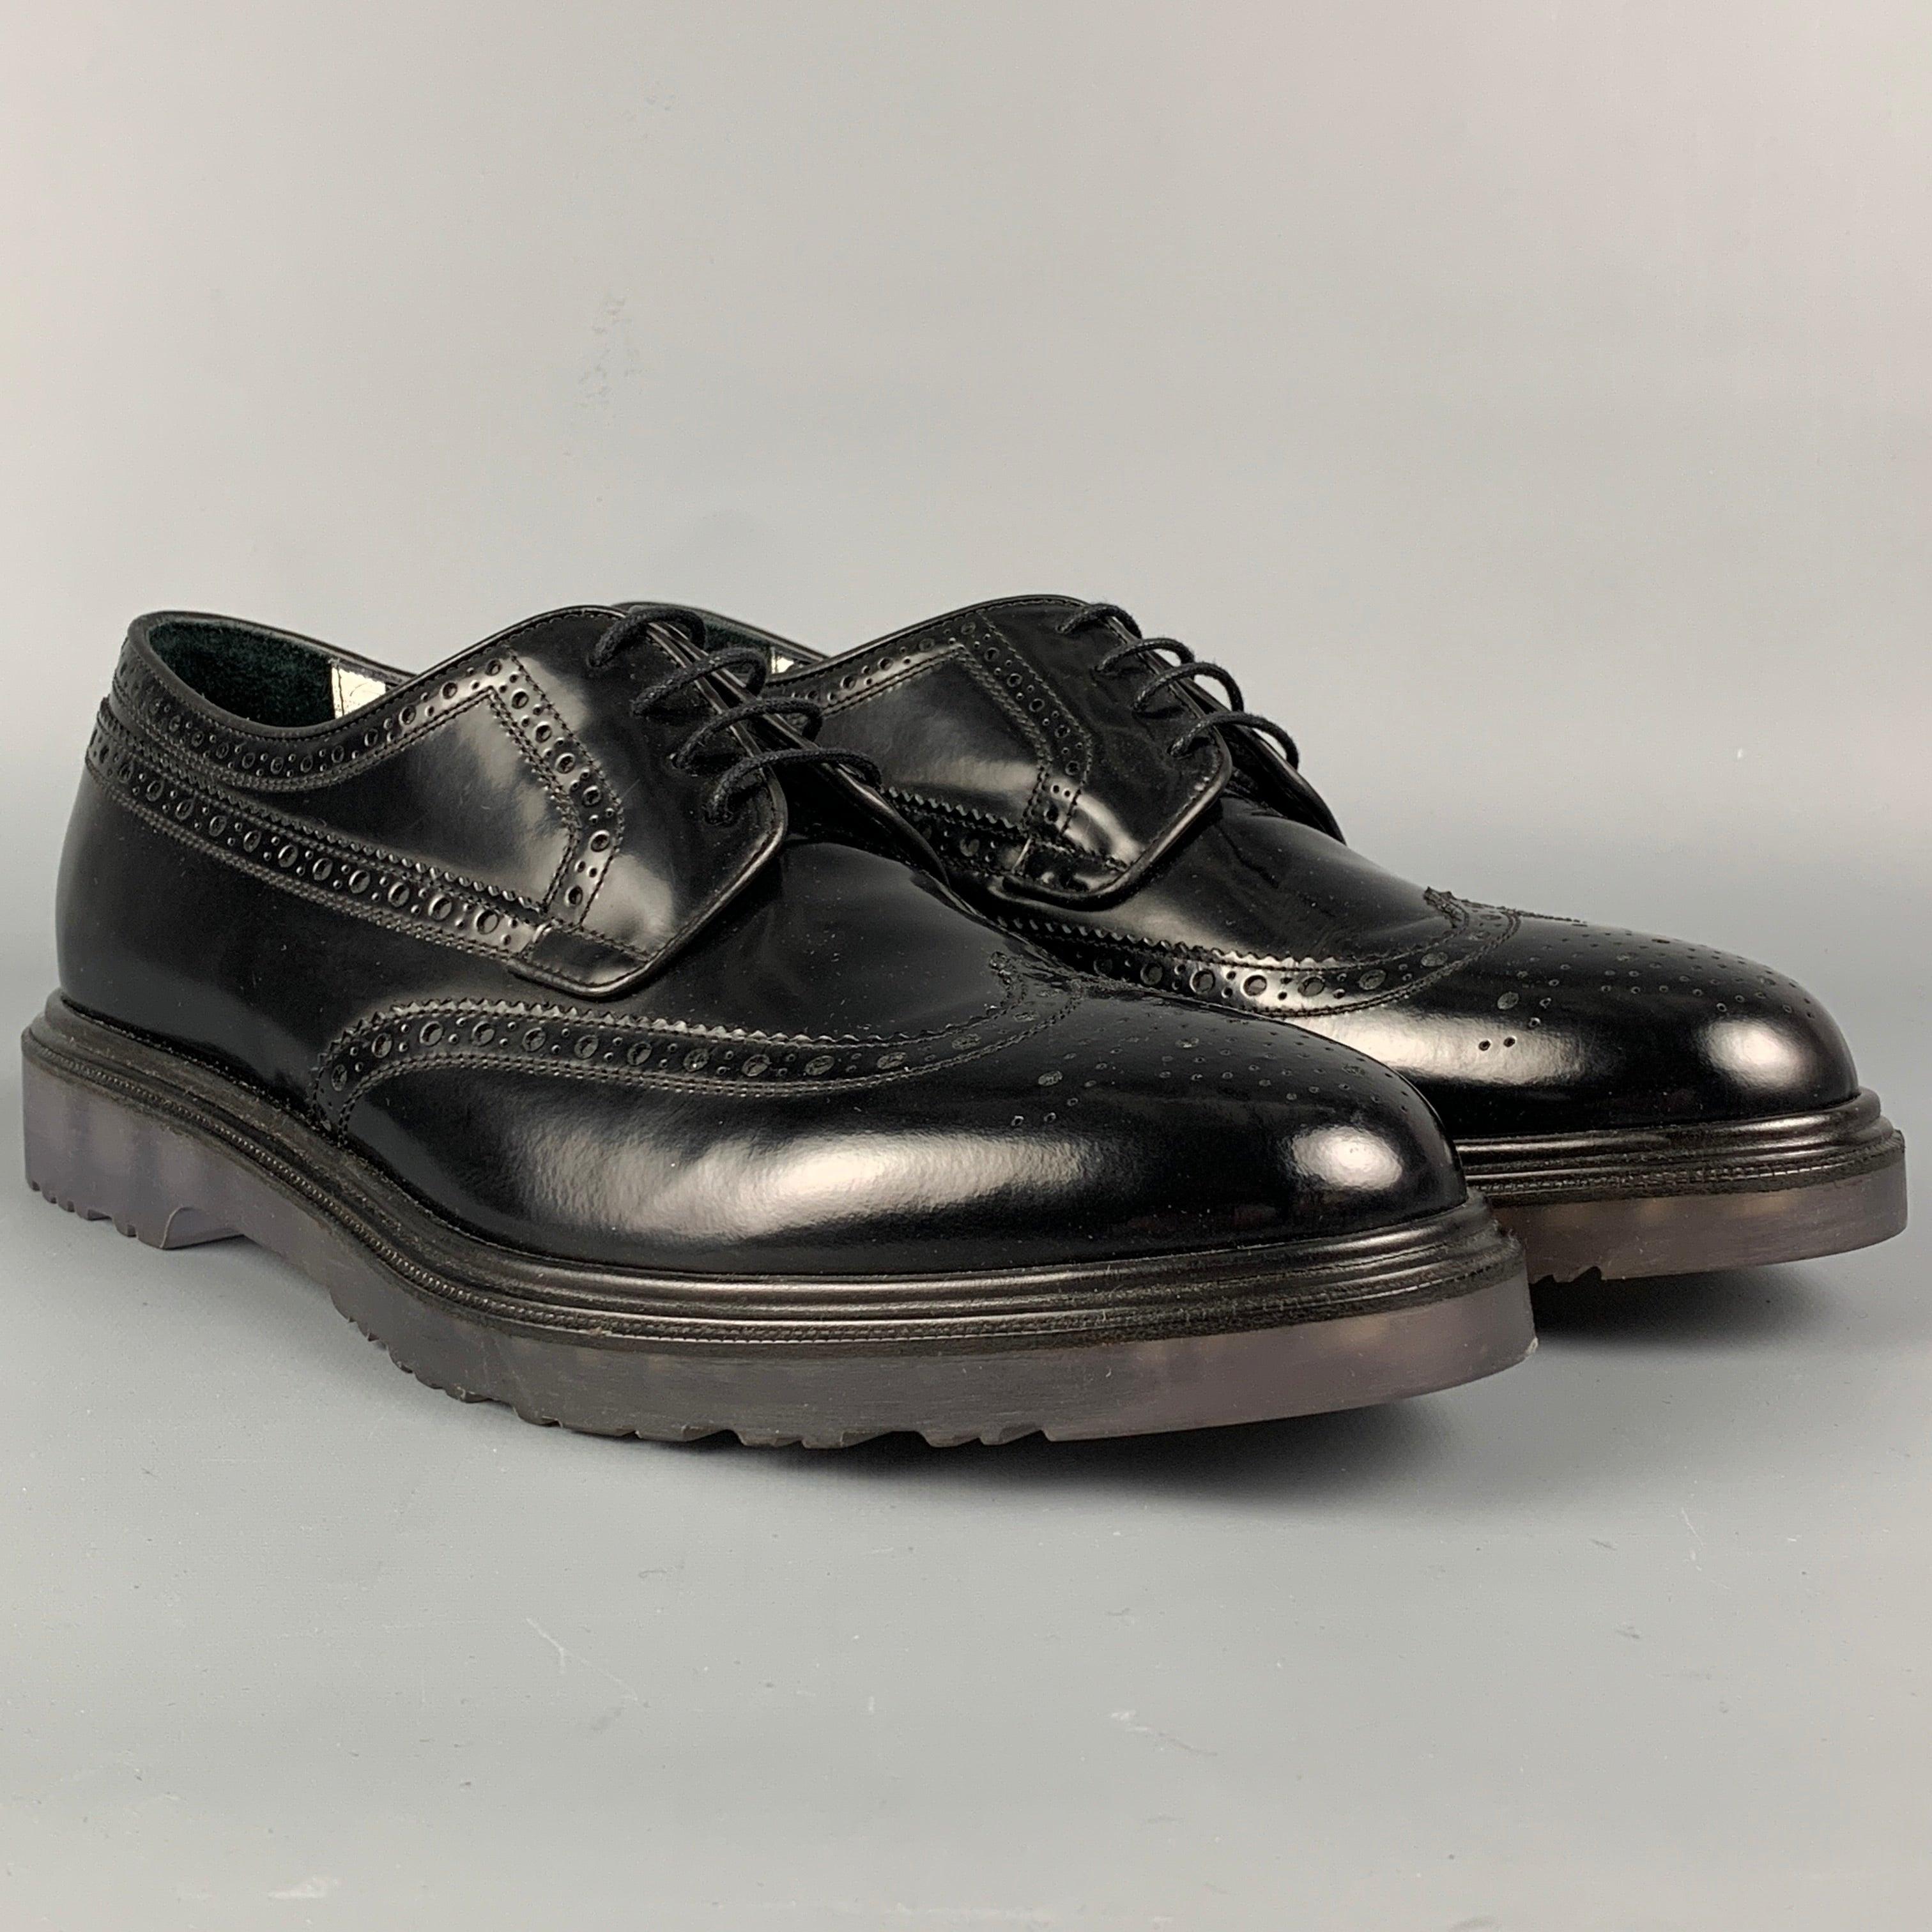 PAUL SMITH shoes comes in a black perforated leather featuring a wingtip style, lace up, and a clear sole. Made in Italy.
Very Good
Pre-Owned Condition. 

Marked:   8Outsole: 12 inches  x 4.5 inches 
  
  
 
Reference: 113381
Category: Lace Up